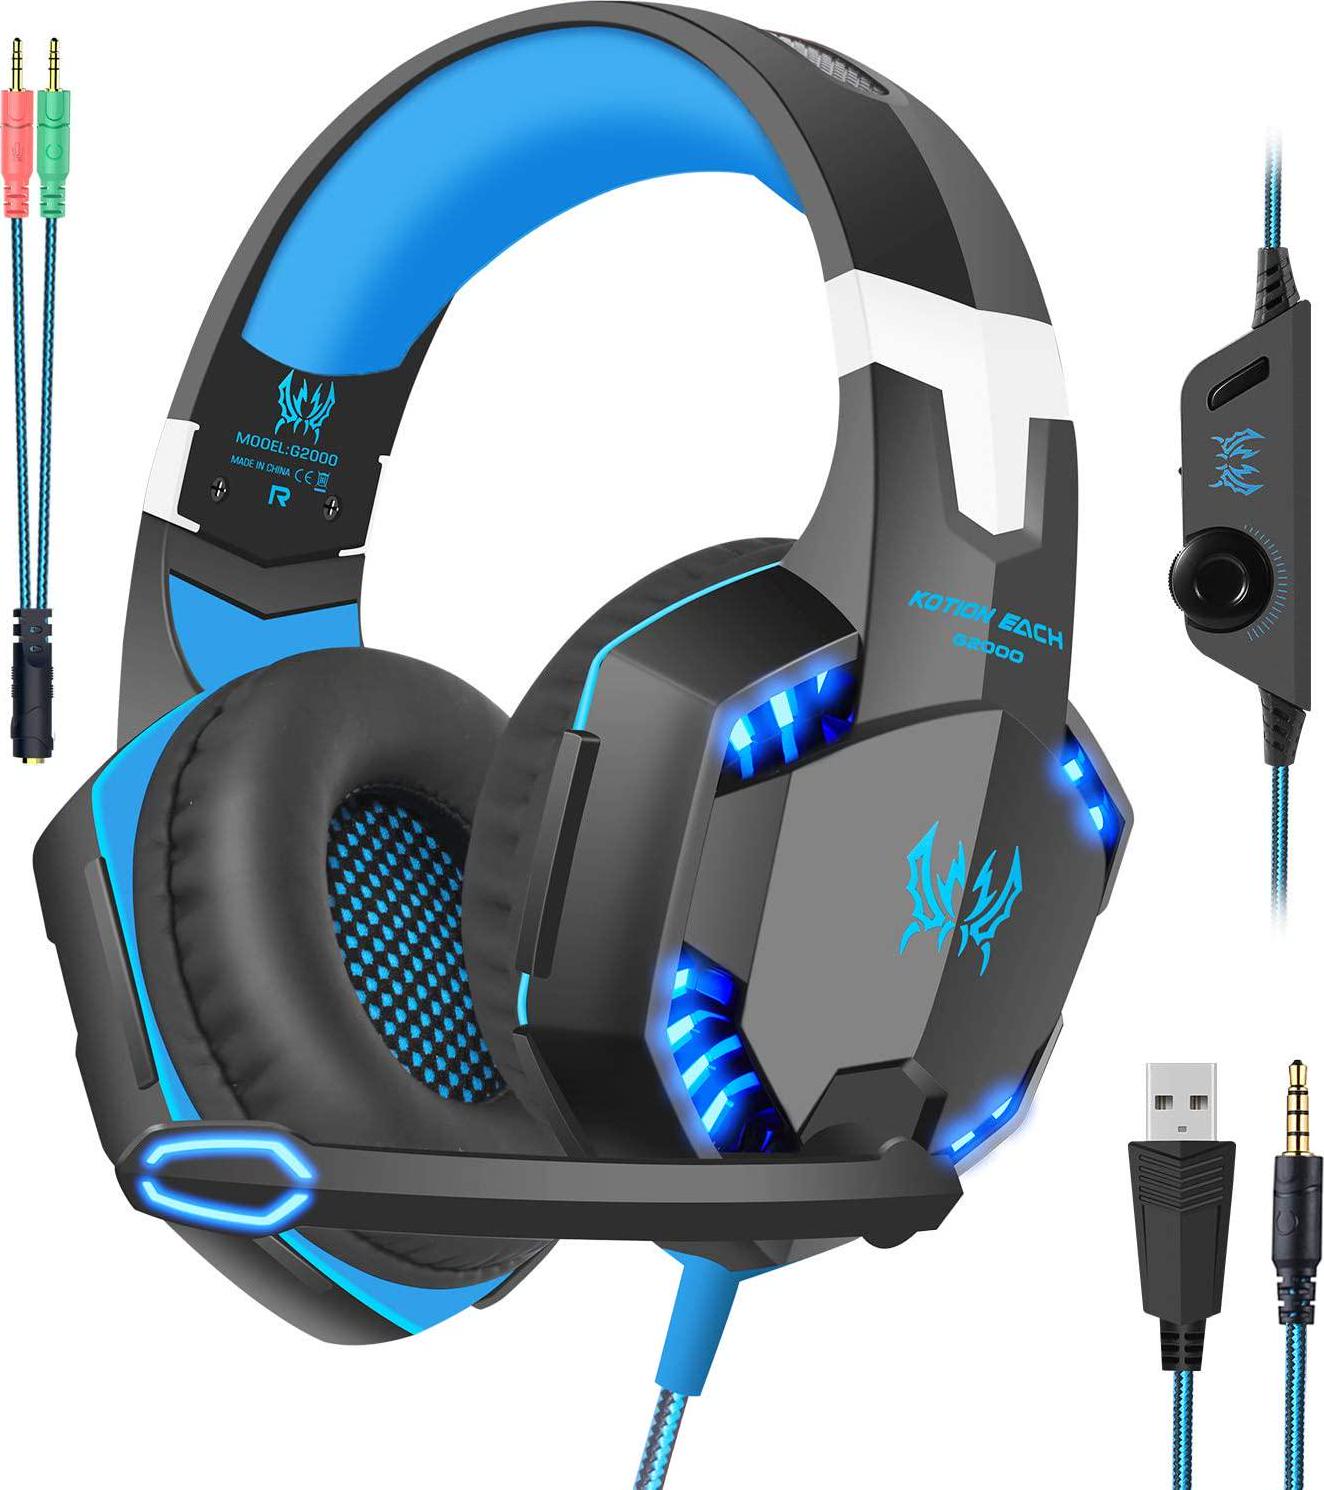 ENVEL, Gaming Headset with Mic for Xbox One,PC,PS4,Over-Ear Headphones with Volume Control LED Light Cool Style Stereo,Noise Reduction for Laptops,Smartphone,Computer,Nintendo Switch